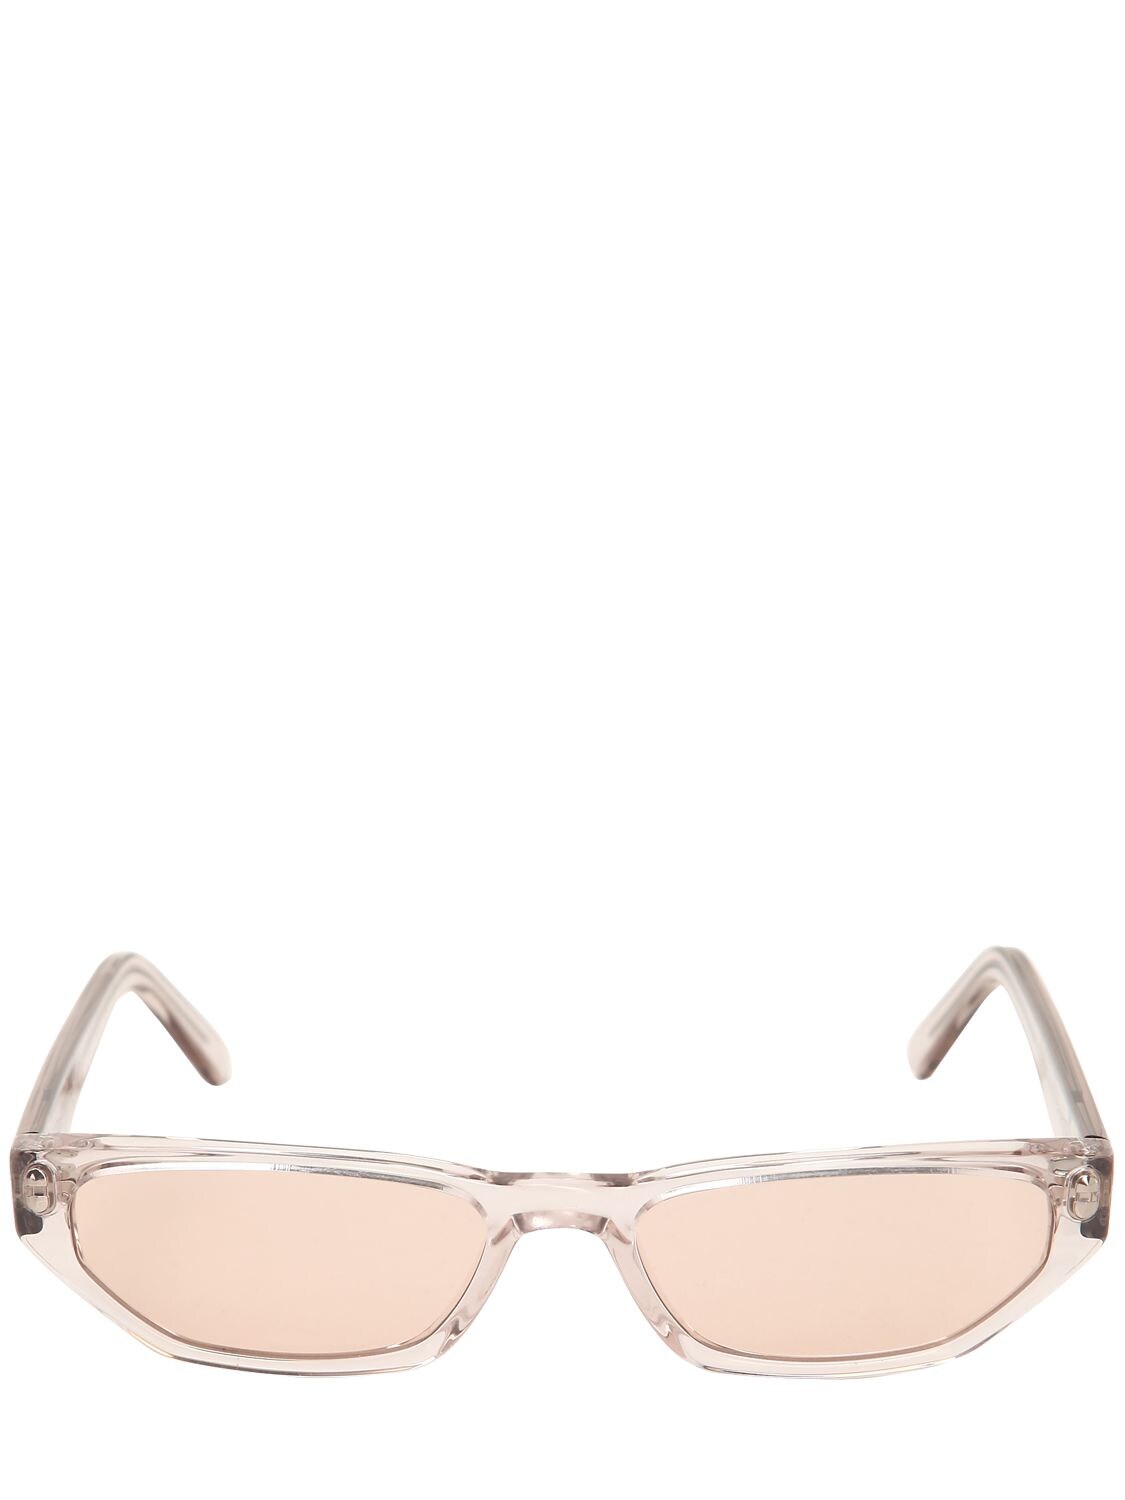 Andy Wolf Tamsyn Acetate Sunglasses In Transparentpink